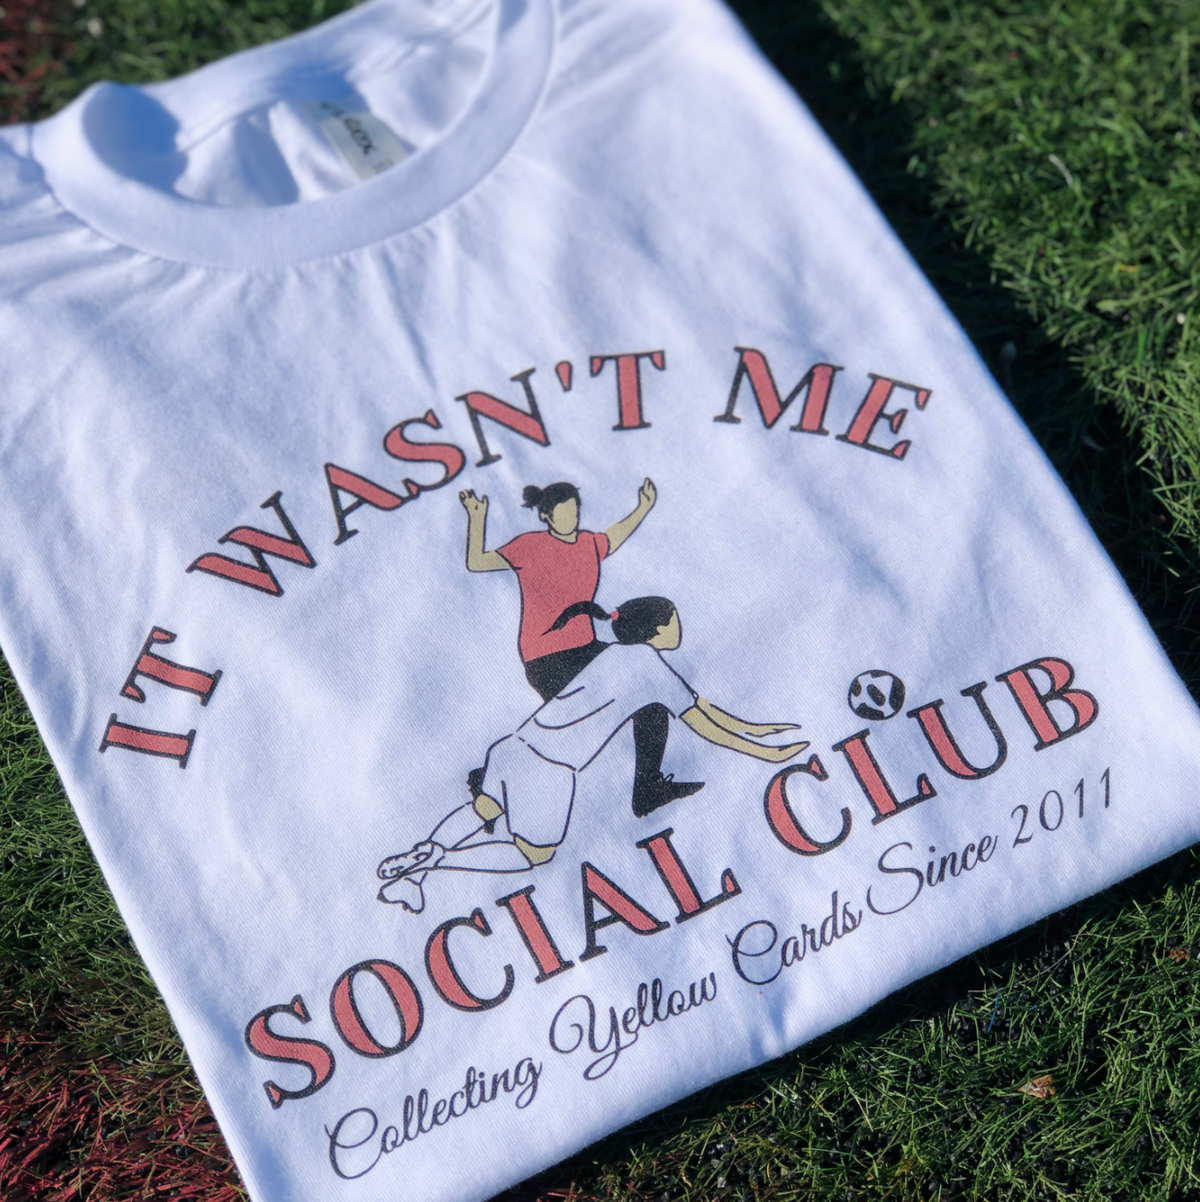 it wasn't me social club collecting yellow cards tshirt by soccergrlprobs